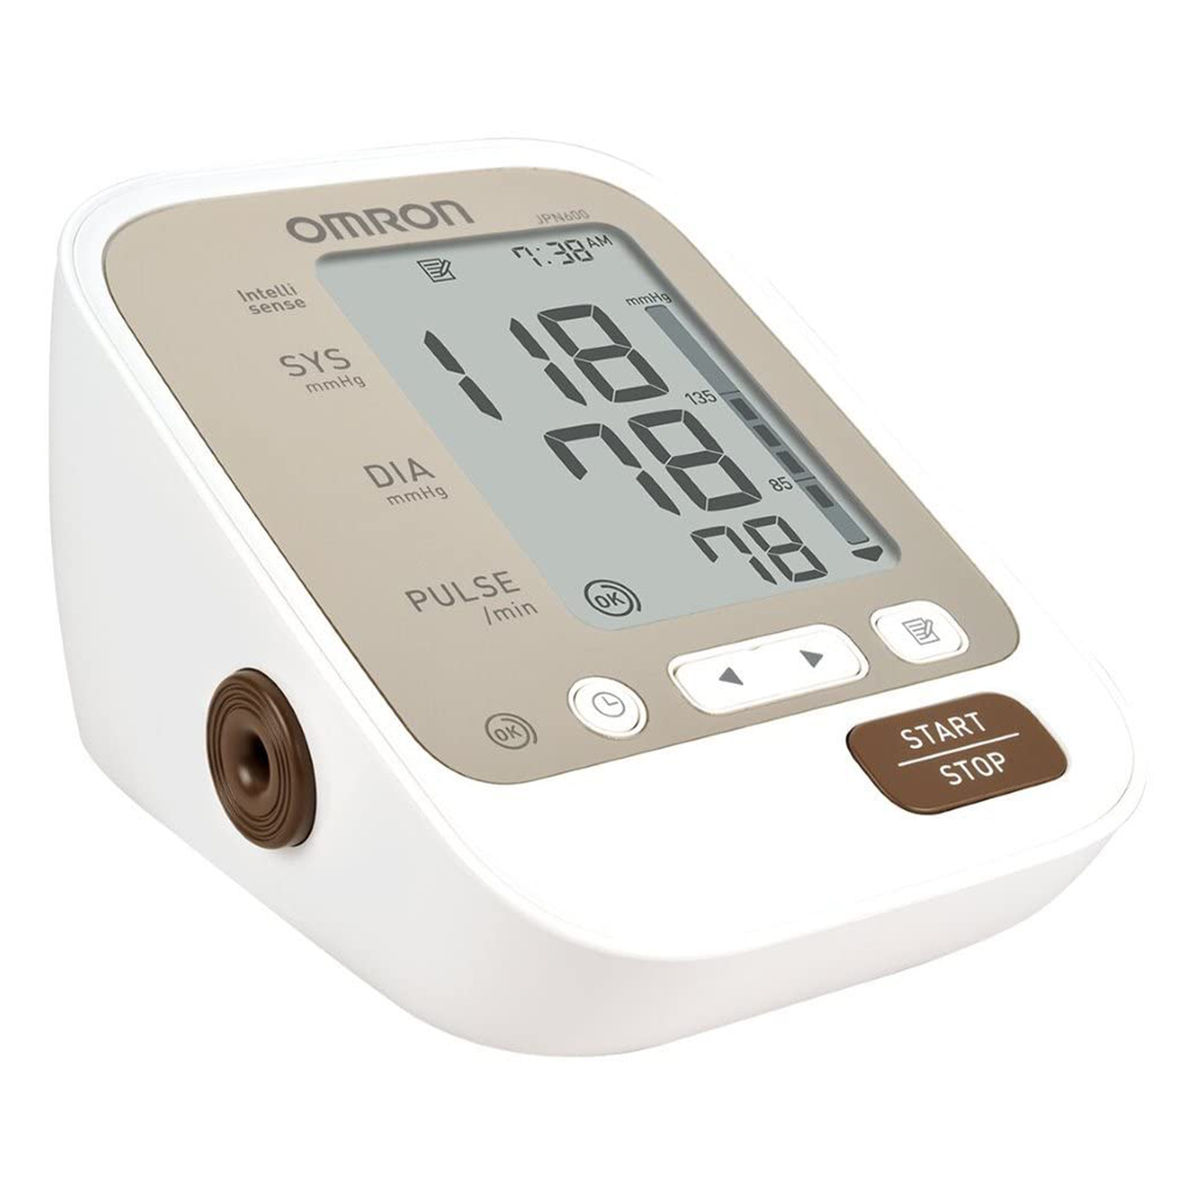 Omron JPN 600 Automatic Blood Pressure Monitor, 1 Count, Pack of 1 